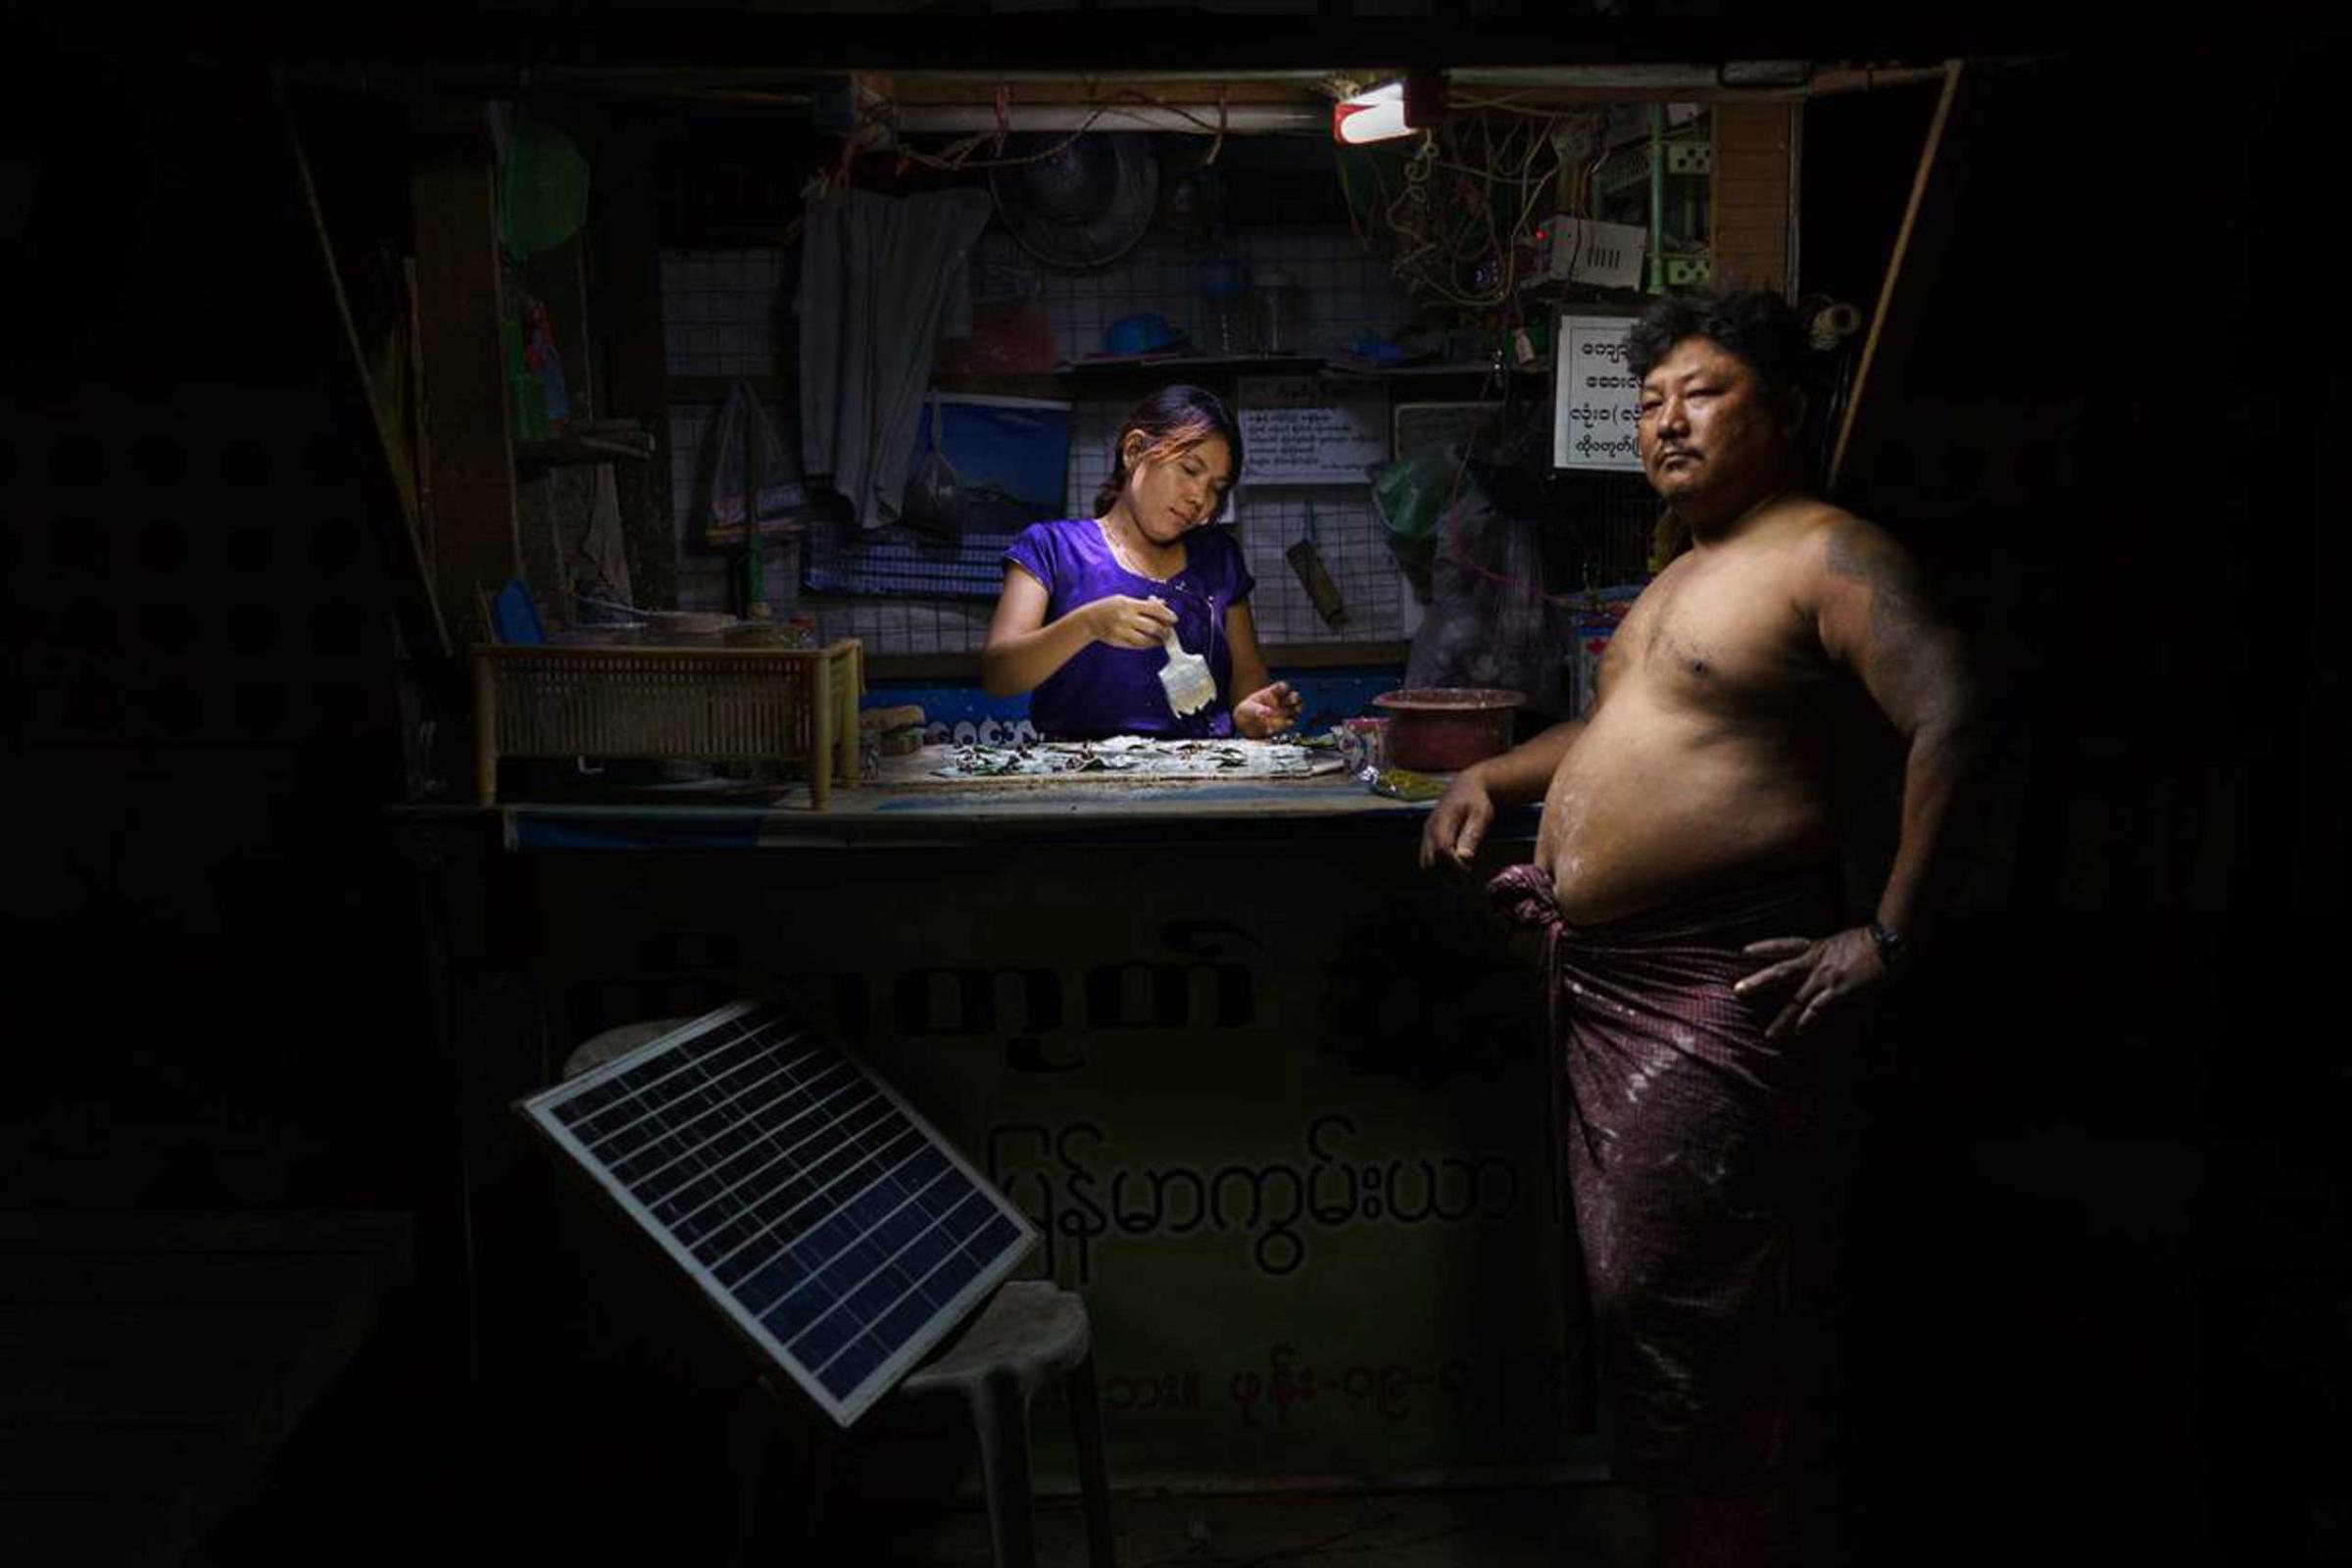 Nyi Min Htut (46) & Cho Cho Win (40) are married and own a bettle-nut shop powered by solar light. Minglar Don Township, 20 km north of Yangon.